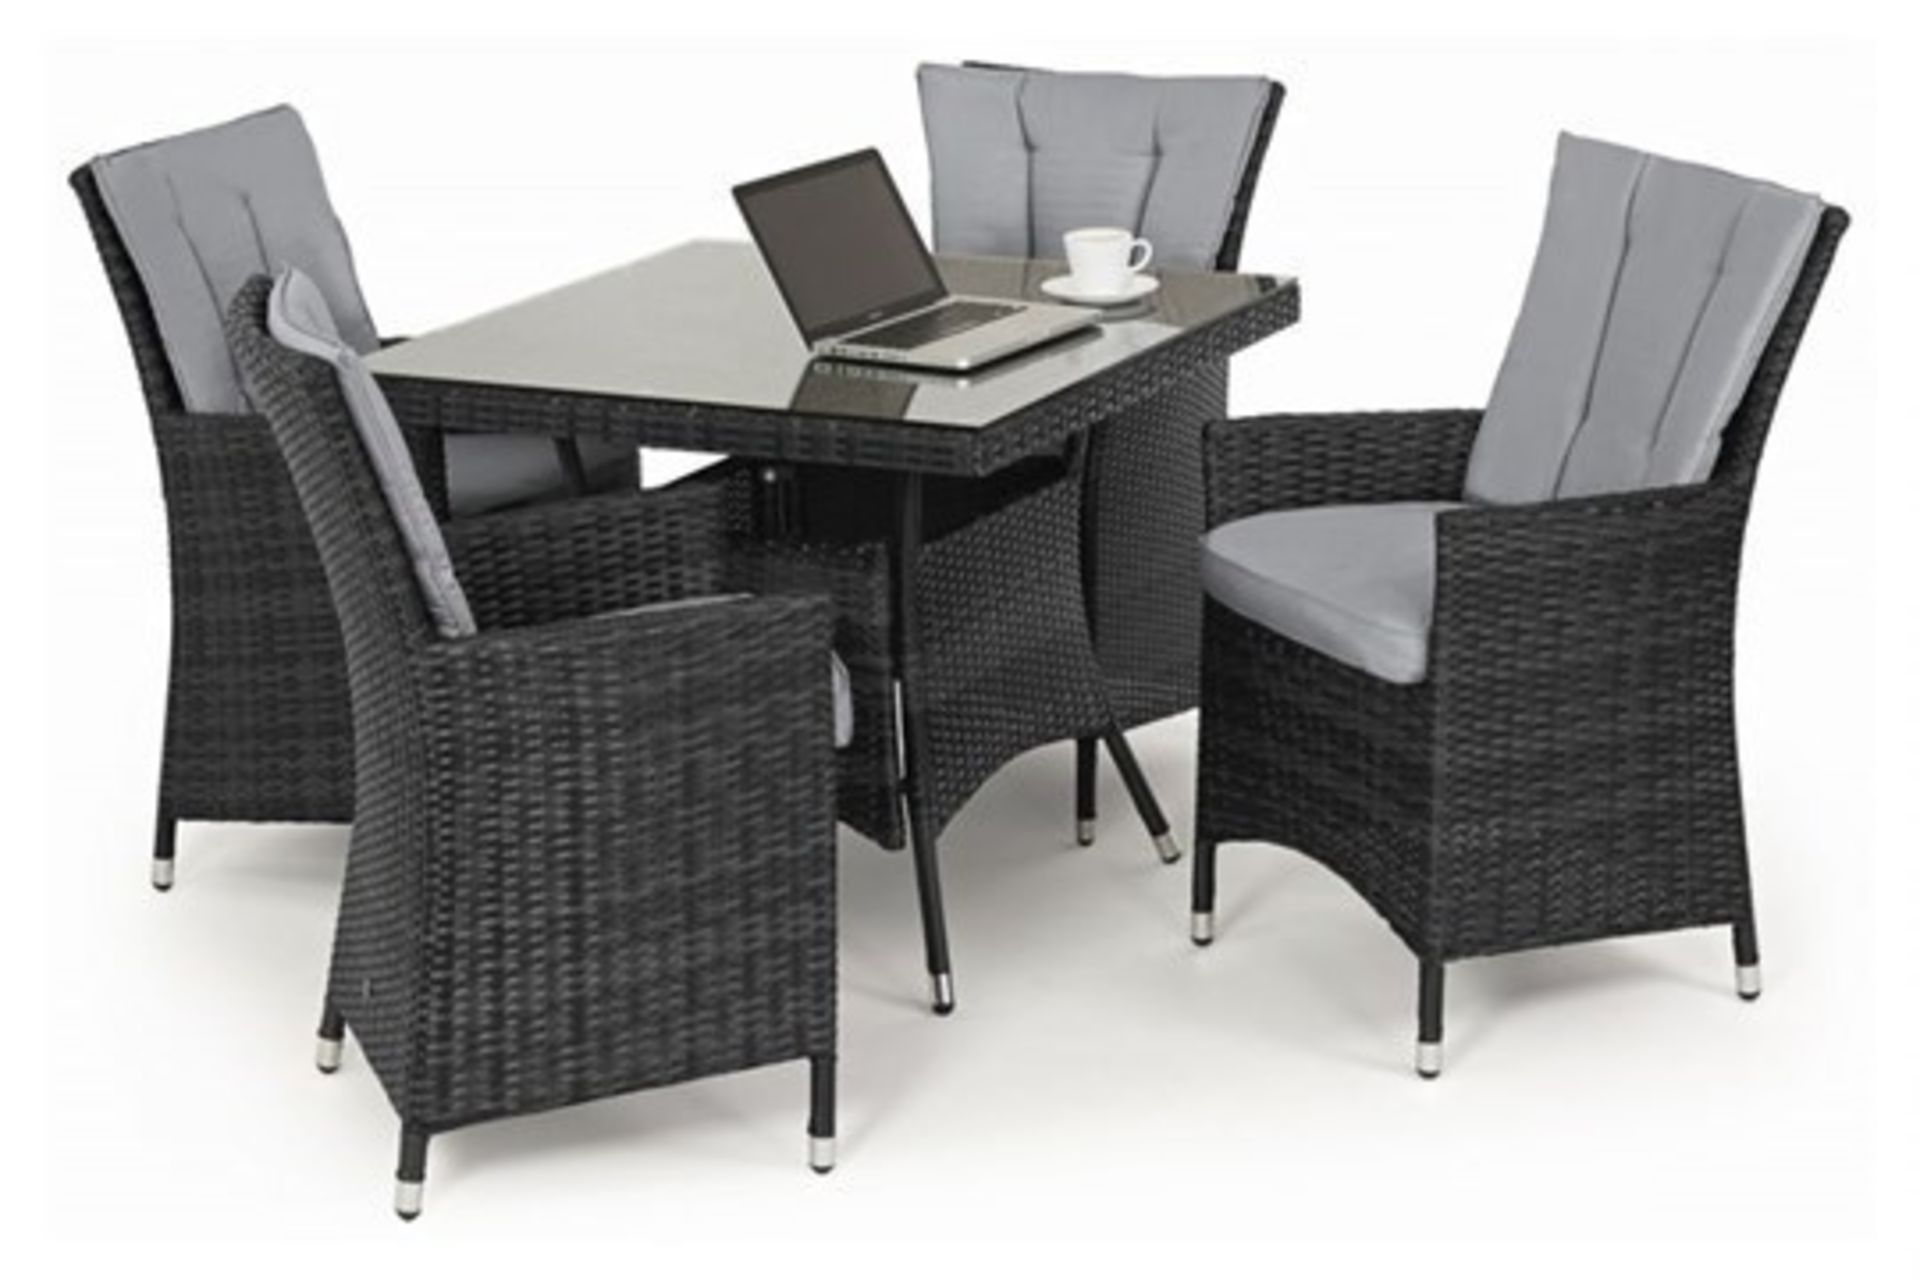 Rattan LA 4 Seat Square Outdoor Dining Set (Grey) *BRAND NEW* - Image 2 of 2